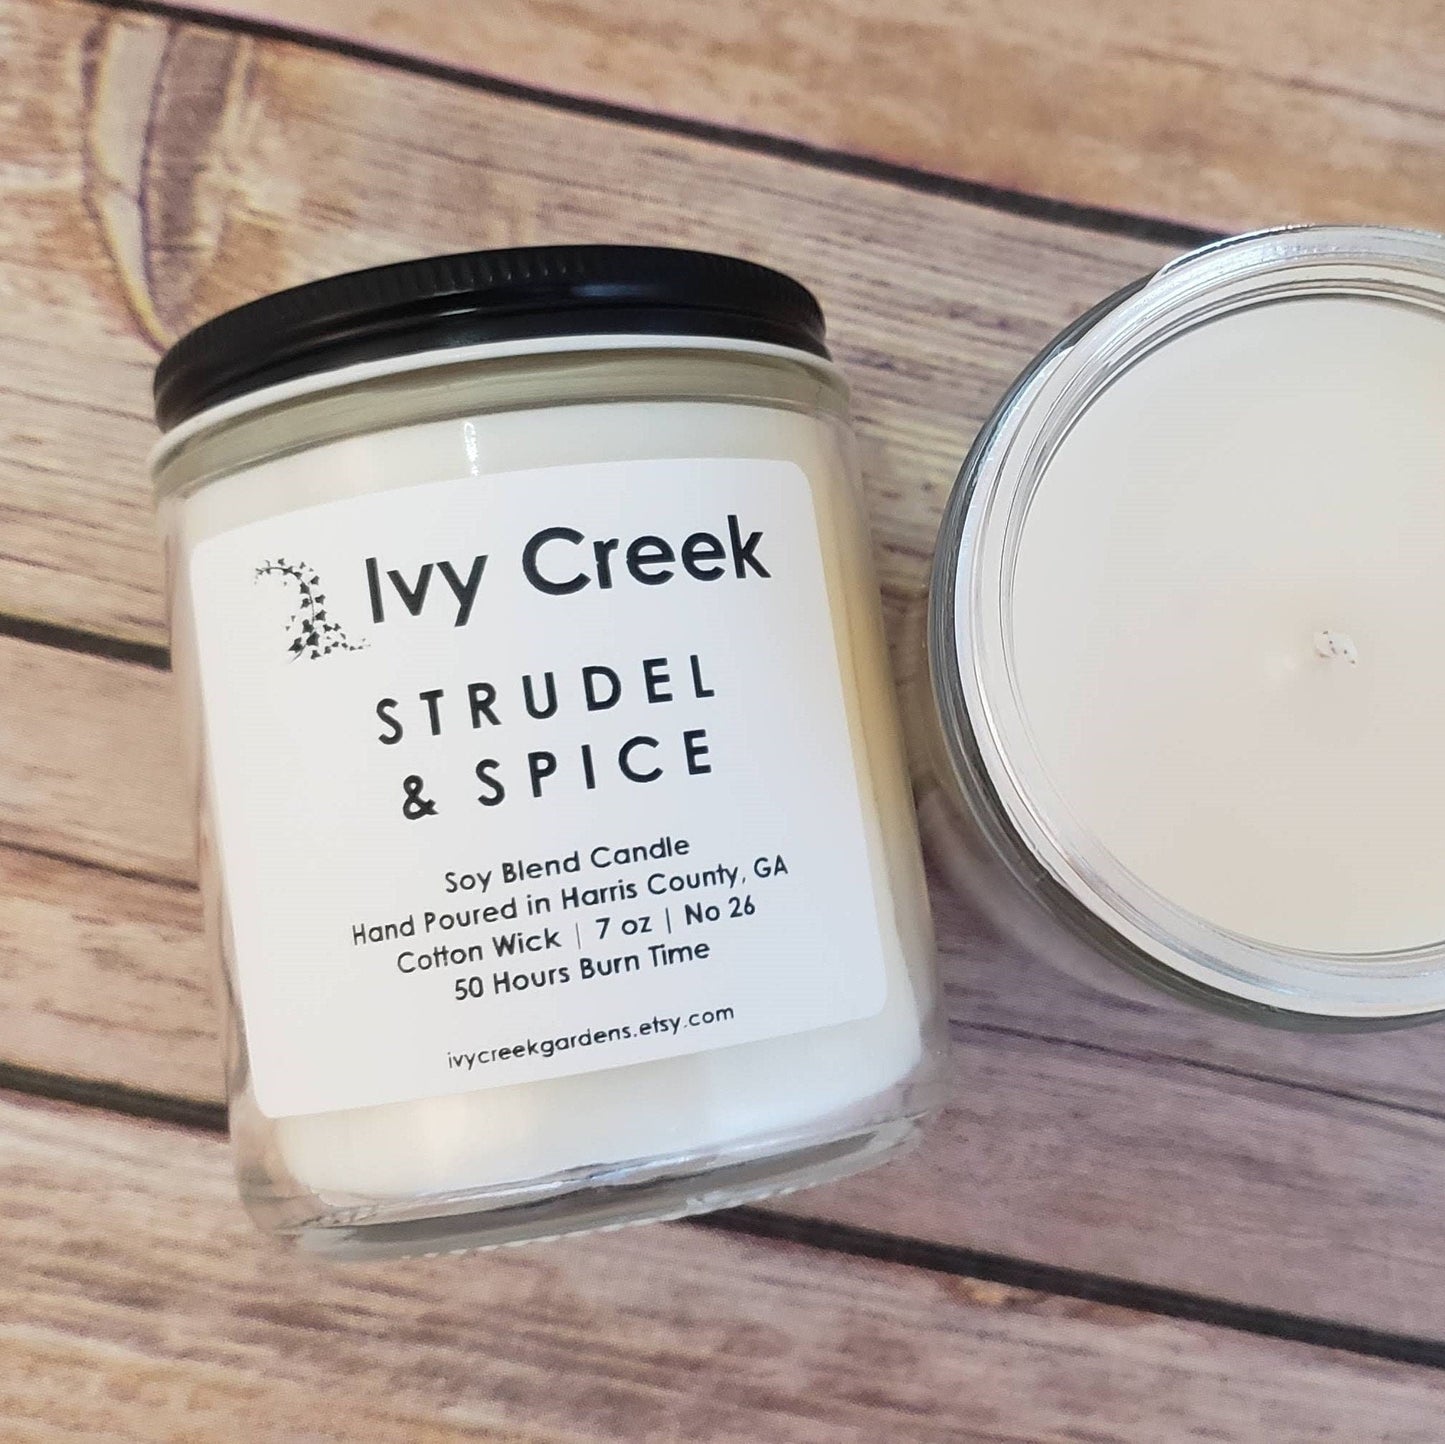 Ivy Creek No 26 | Strudel & Spice Soy Blend Candle | Hand Poured | 7 oz | Cotton Wick | Small Batch | Clean Burning | Container Candle